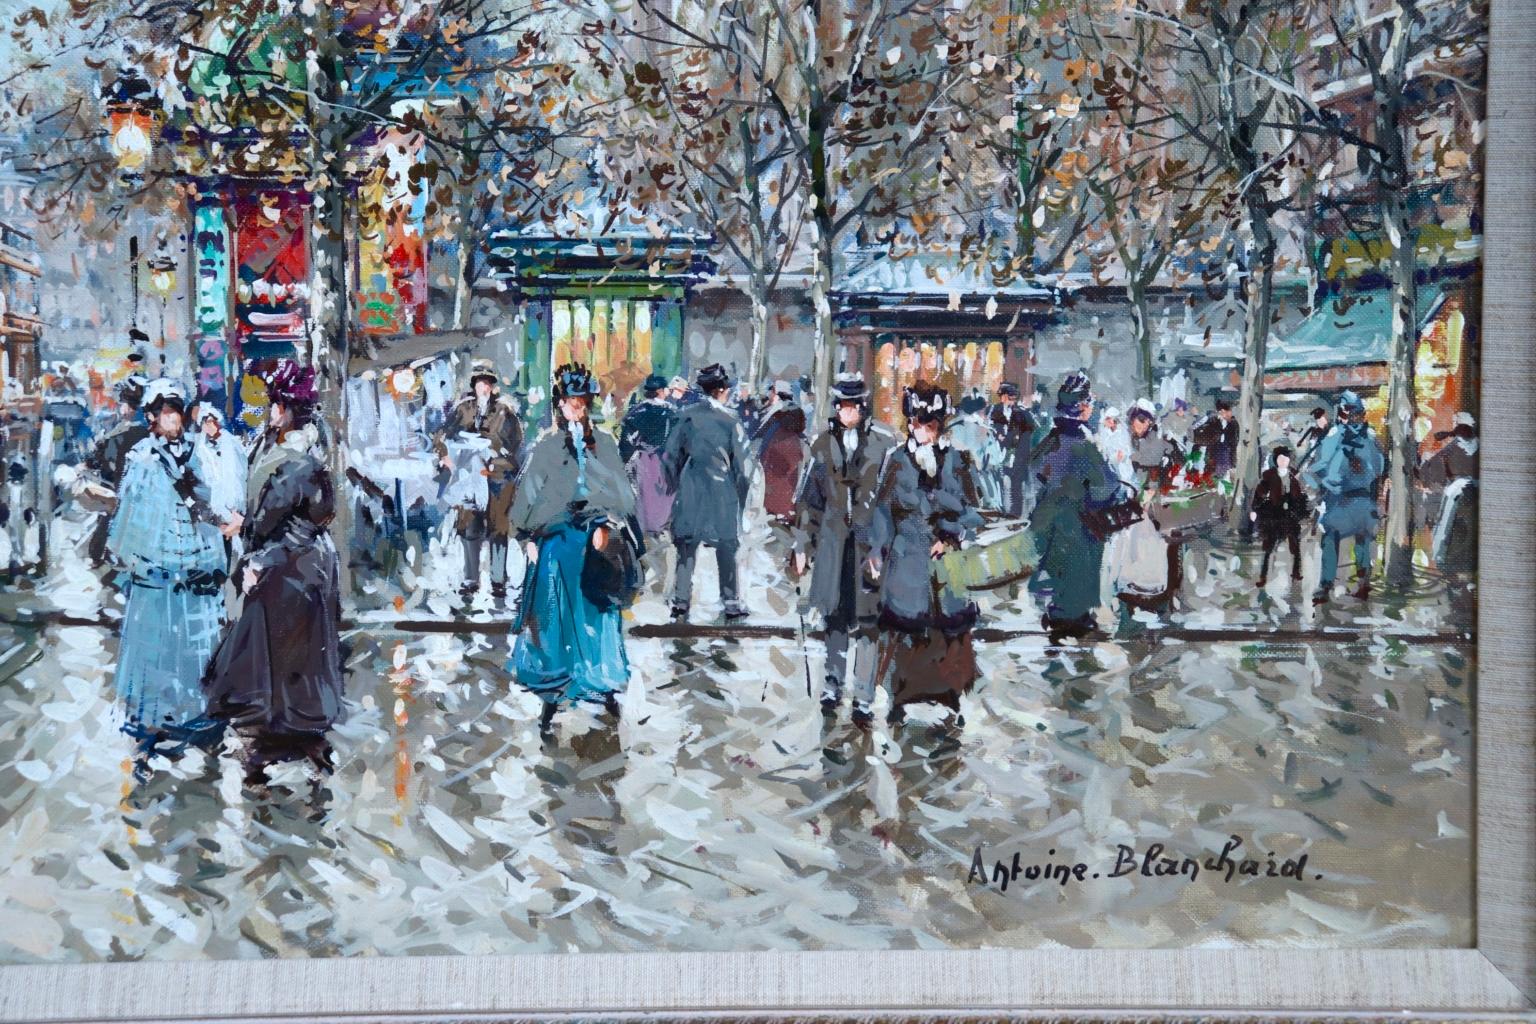 A wonderful oil on canvas circa 1970 by French Post-Impressionist painter Antoine Blanchard depicting a cityscape showing the hustle and bustle at La Madeleine in Paris on a cold day. Signed lower right. The painting is listed in the Antoine